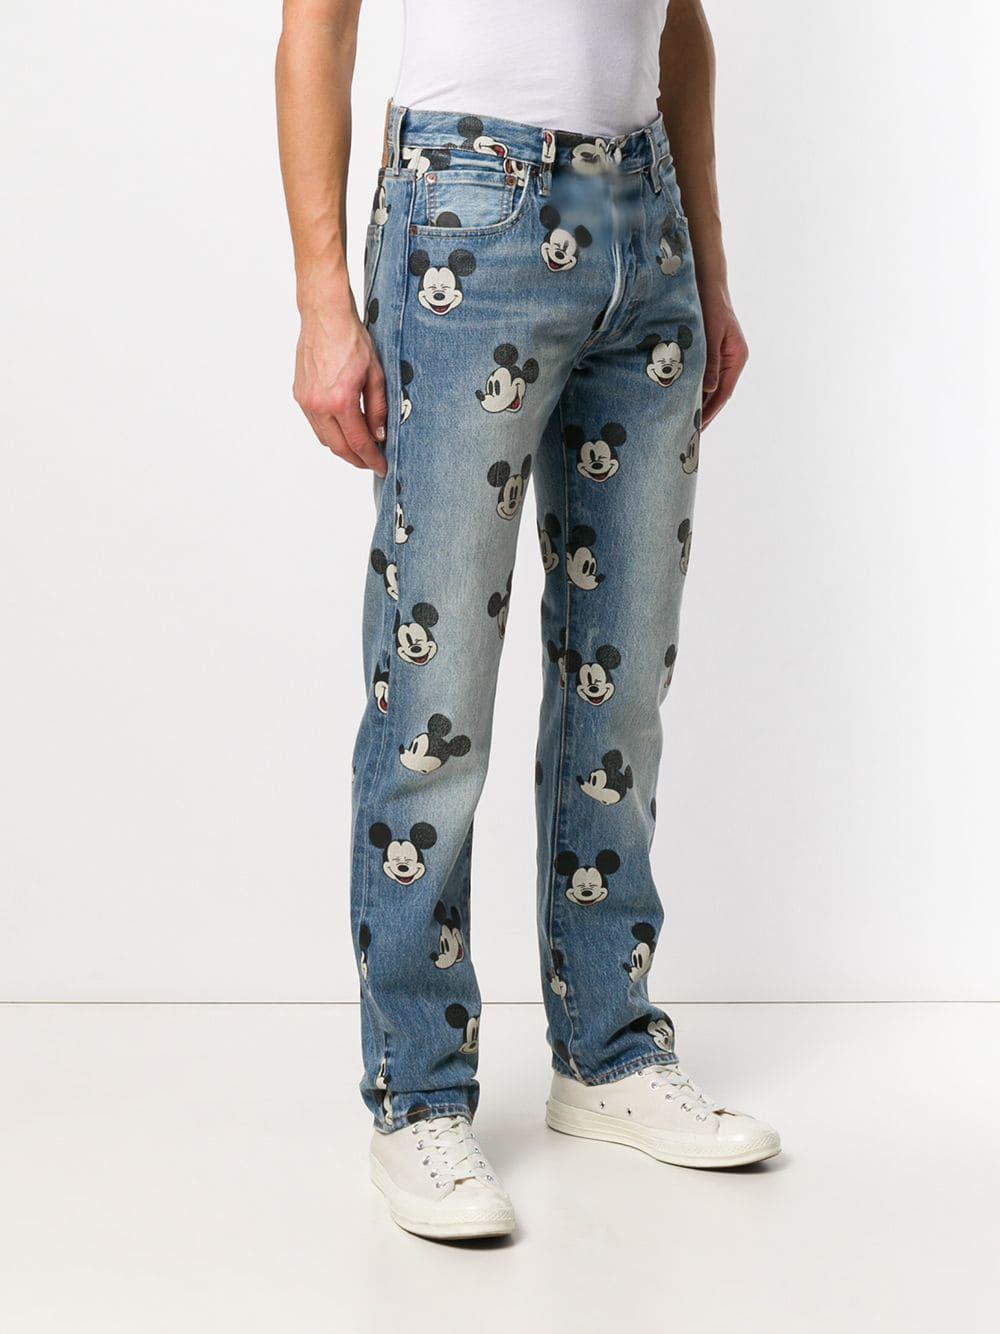 levi's disney jeans Cheaper Than Retail Price> Buy Clothing, Accessories  and lifestyle products for women & men -